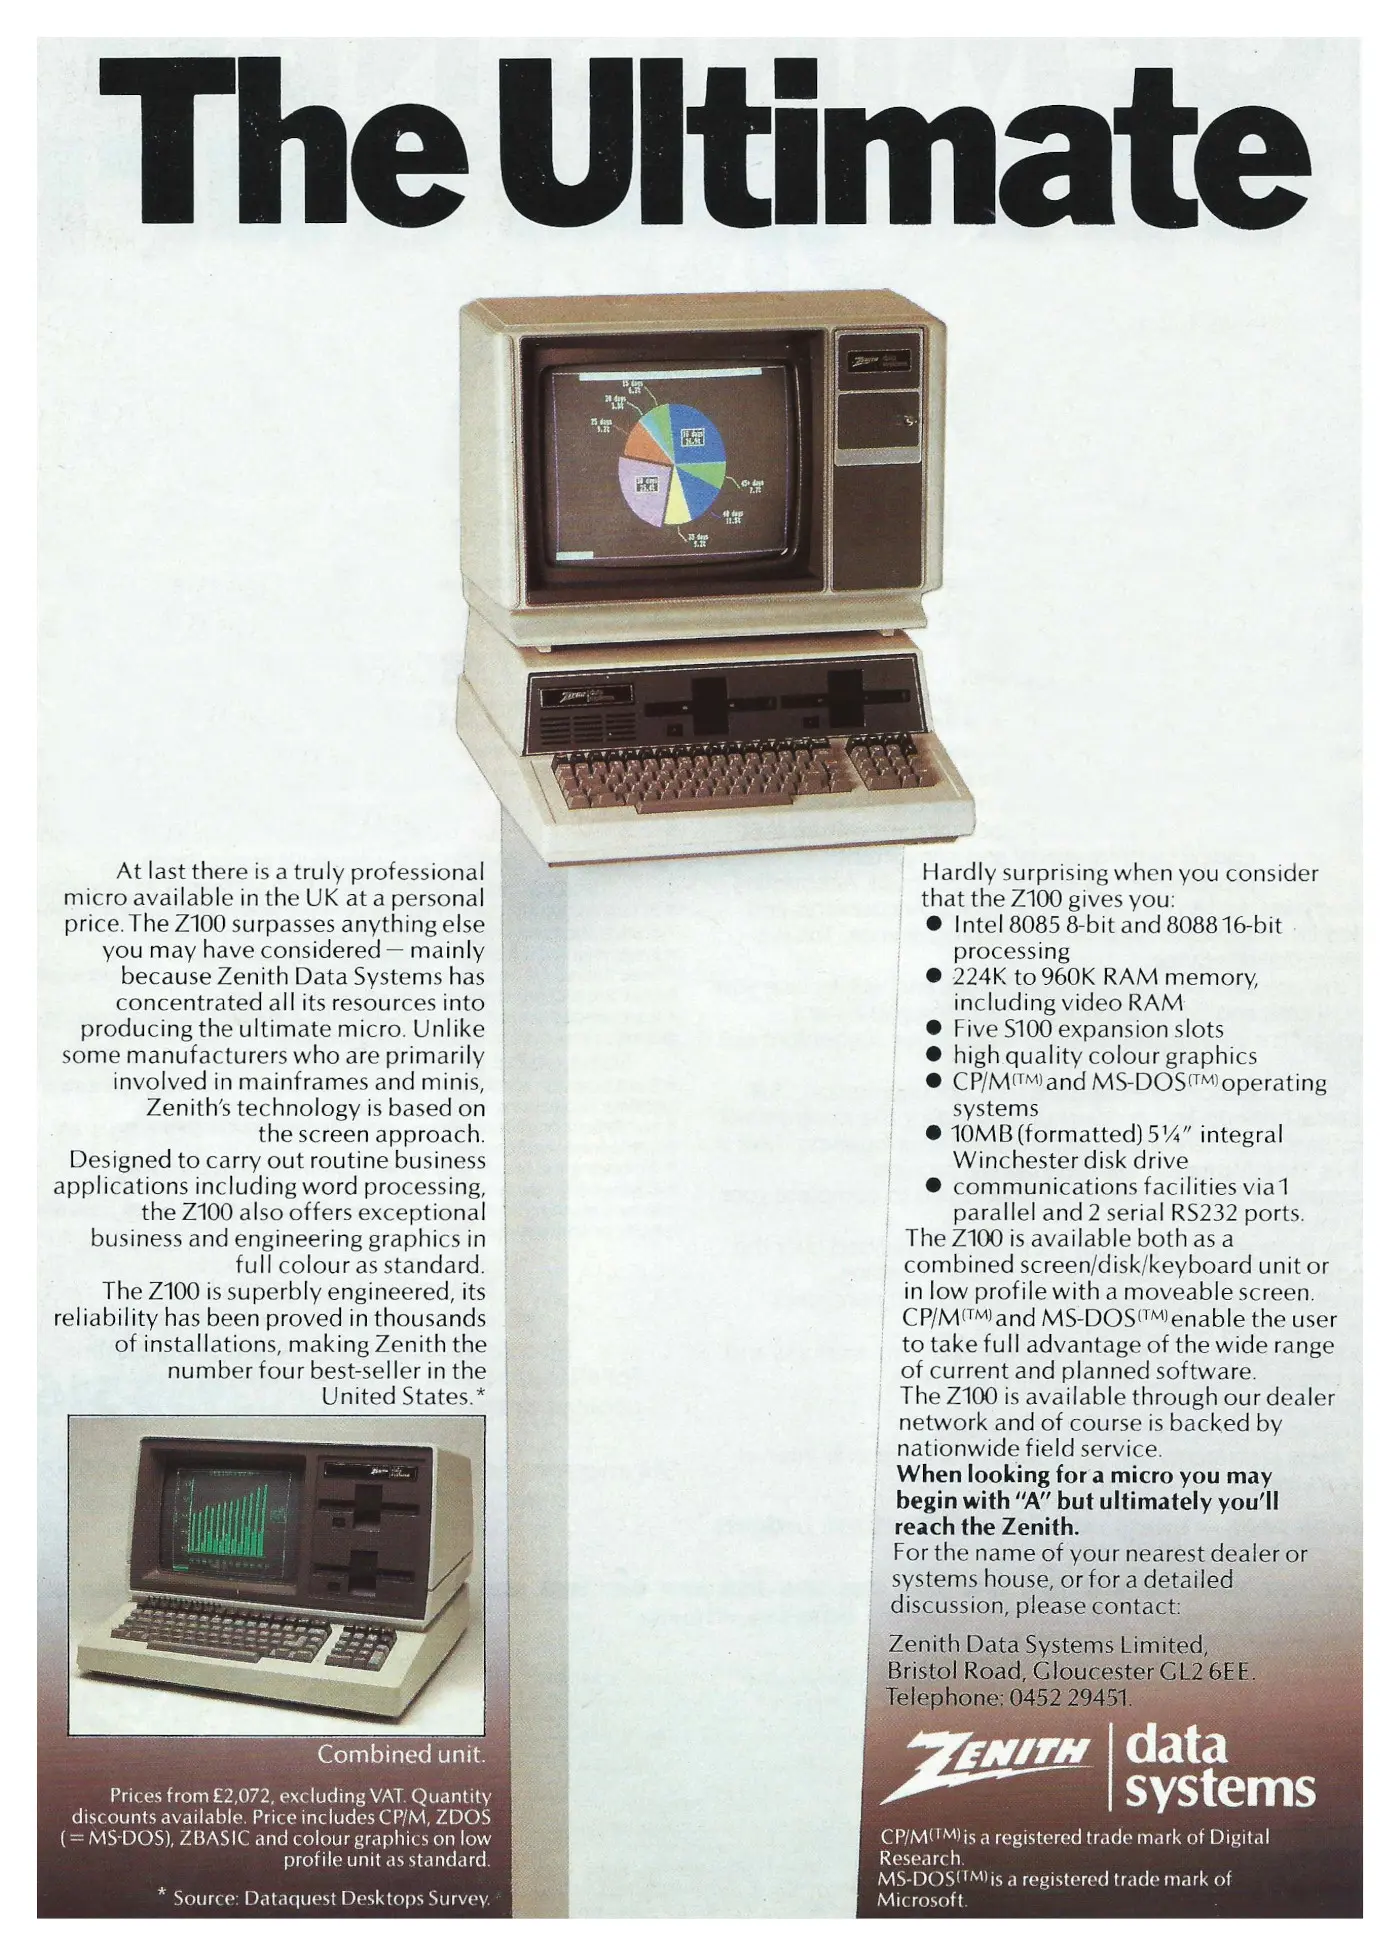 Zenith Data Systems Advert: The Ultimate - Zenith Data Systems Z-100, from Practical Computing, May 1983